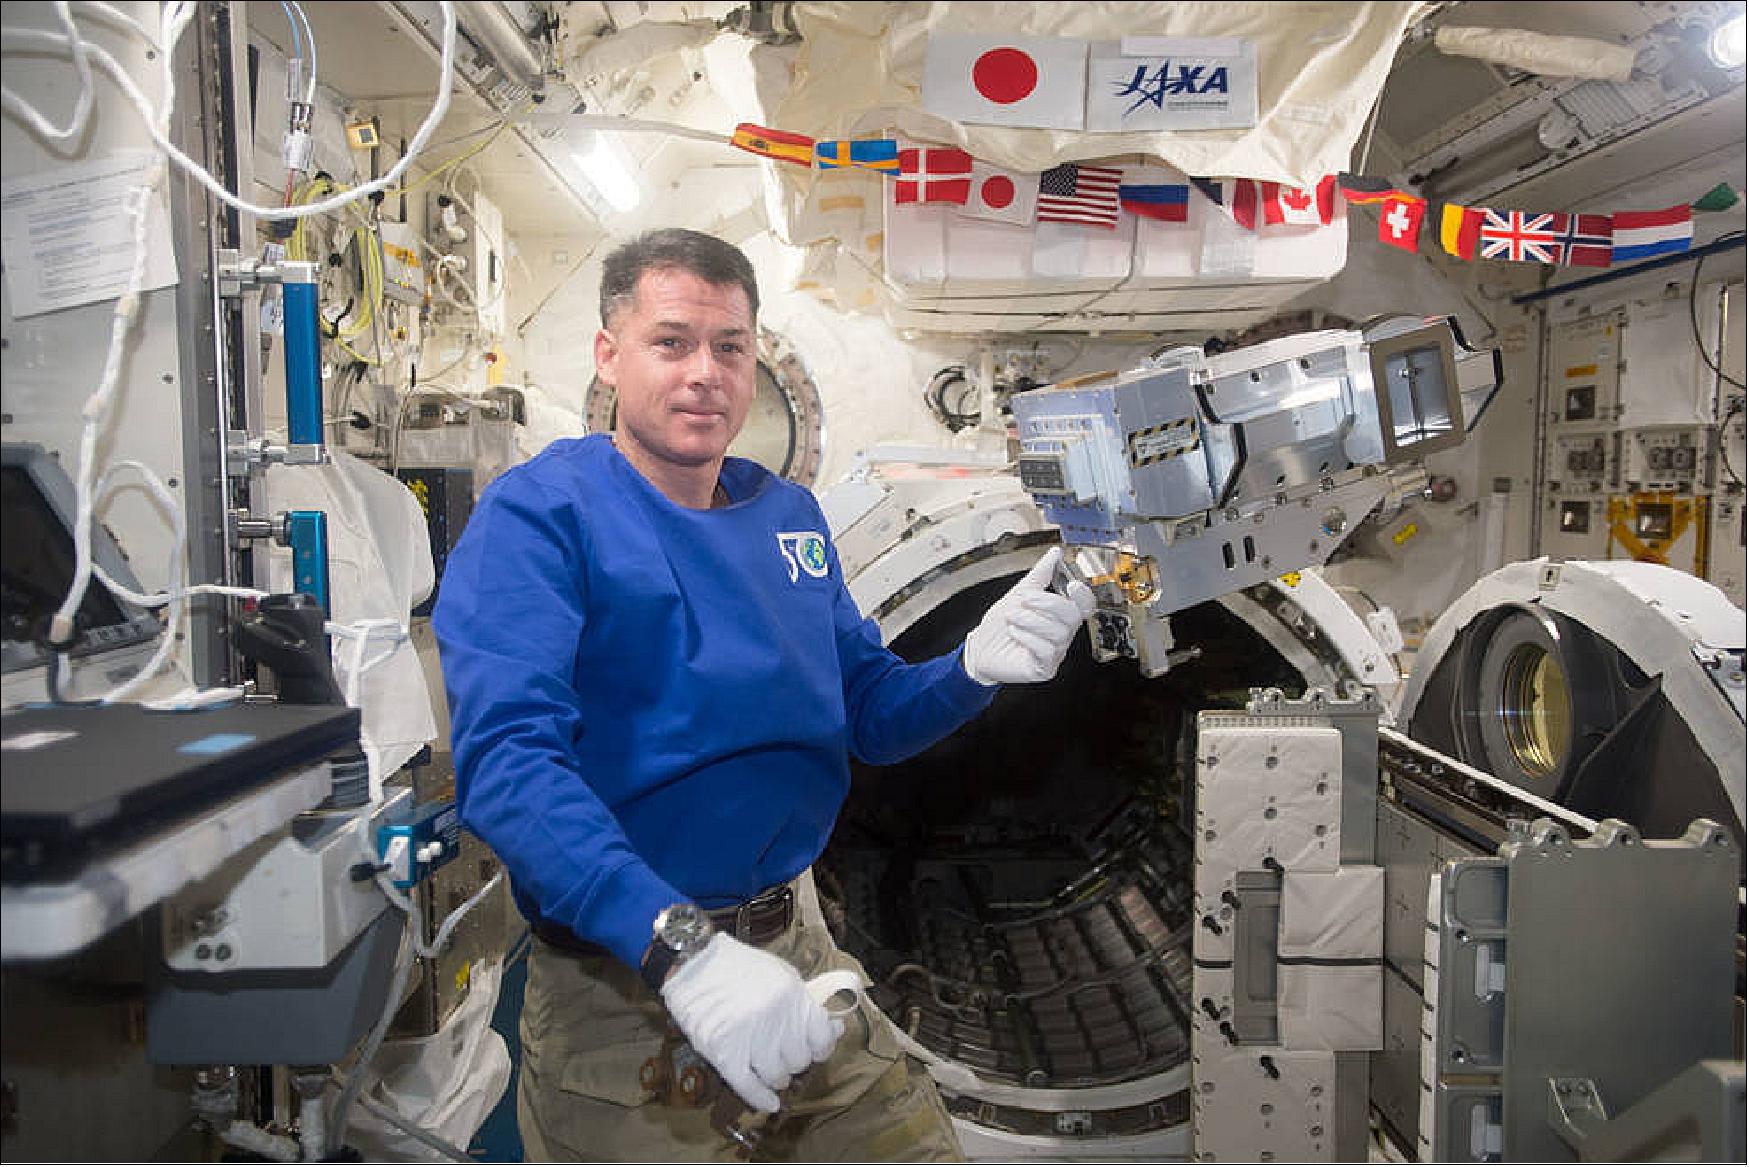 Figure 3: Photo of astronaut Shane Kimbrough with RELL aboard the International Space Station (image credit: NASA)